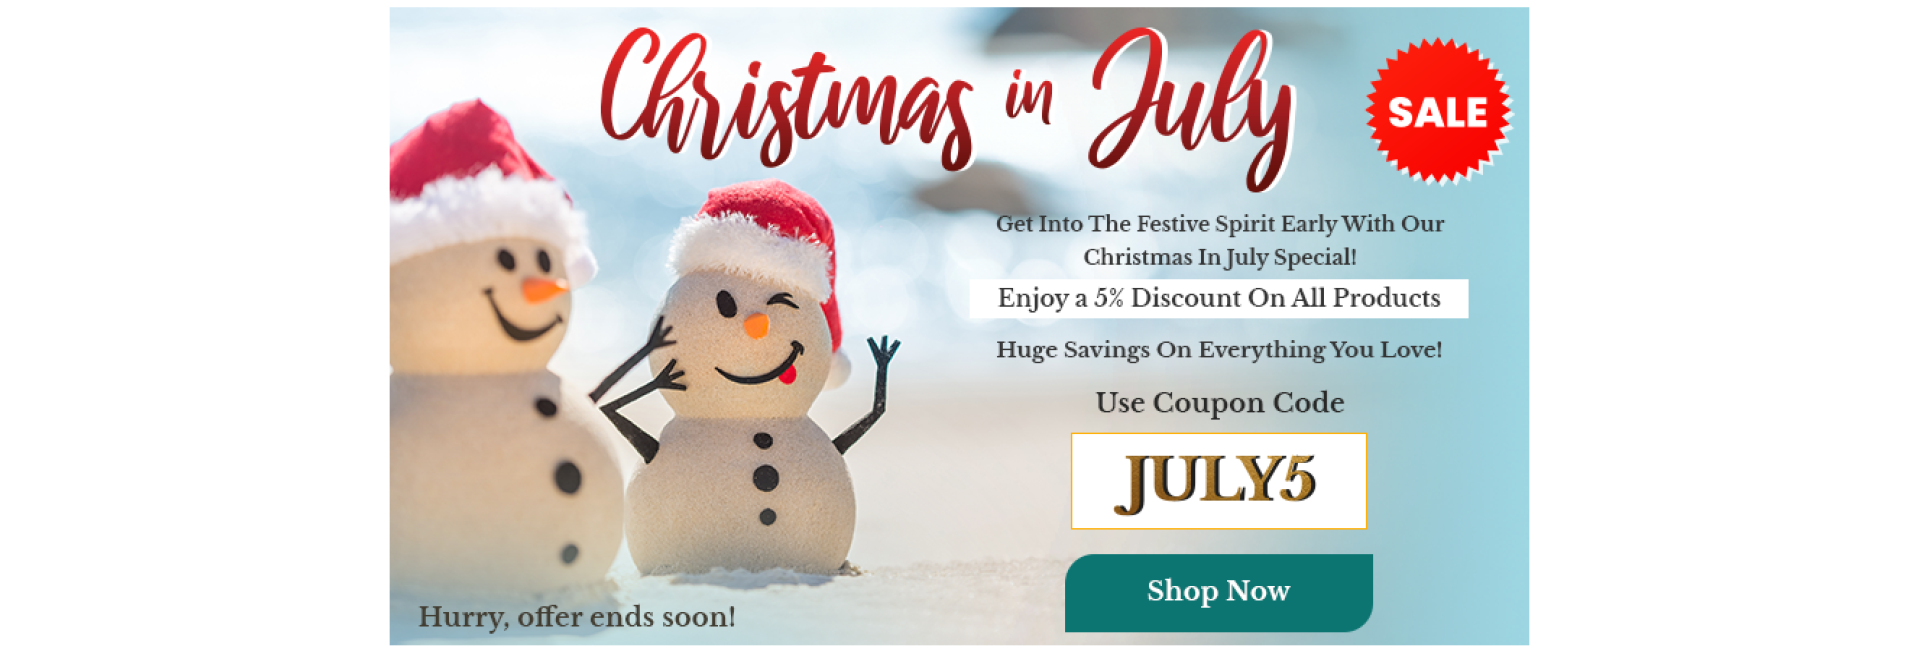 At our Christmas in July sale receive an extra 5% off every purchase using paypal or credit card